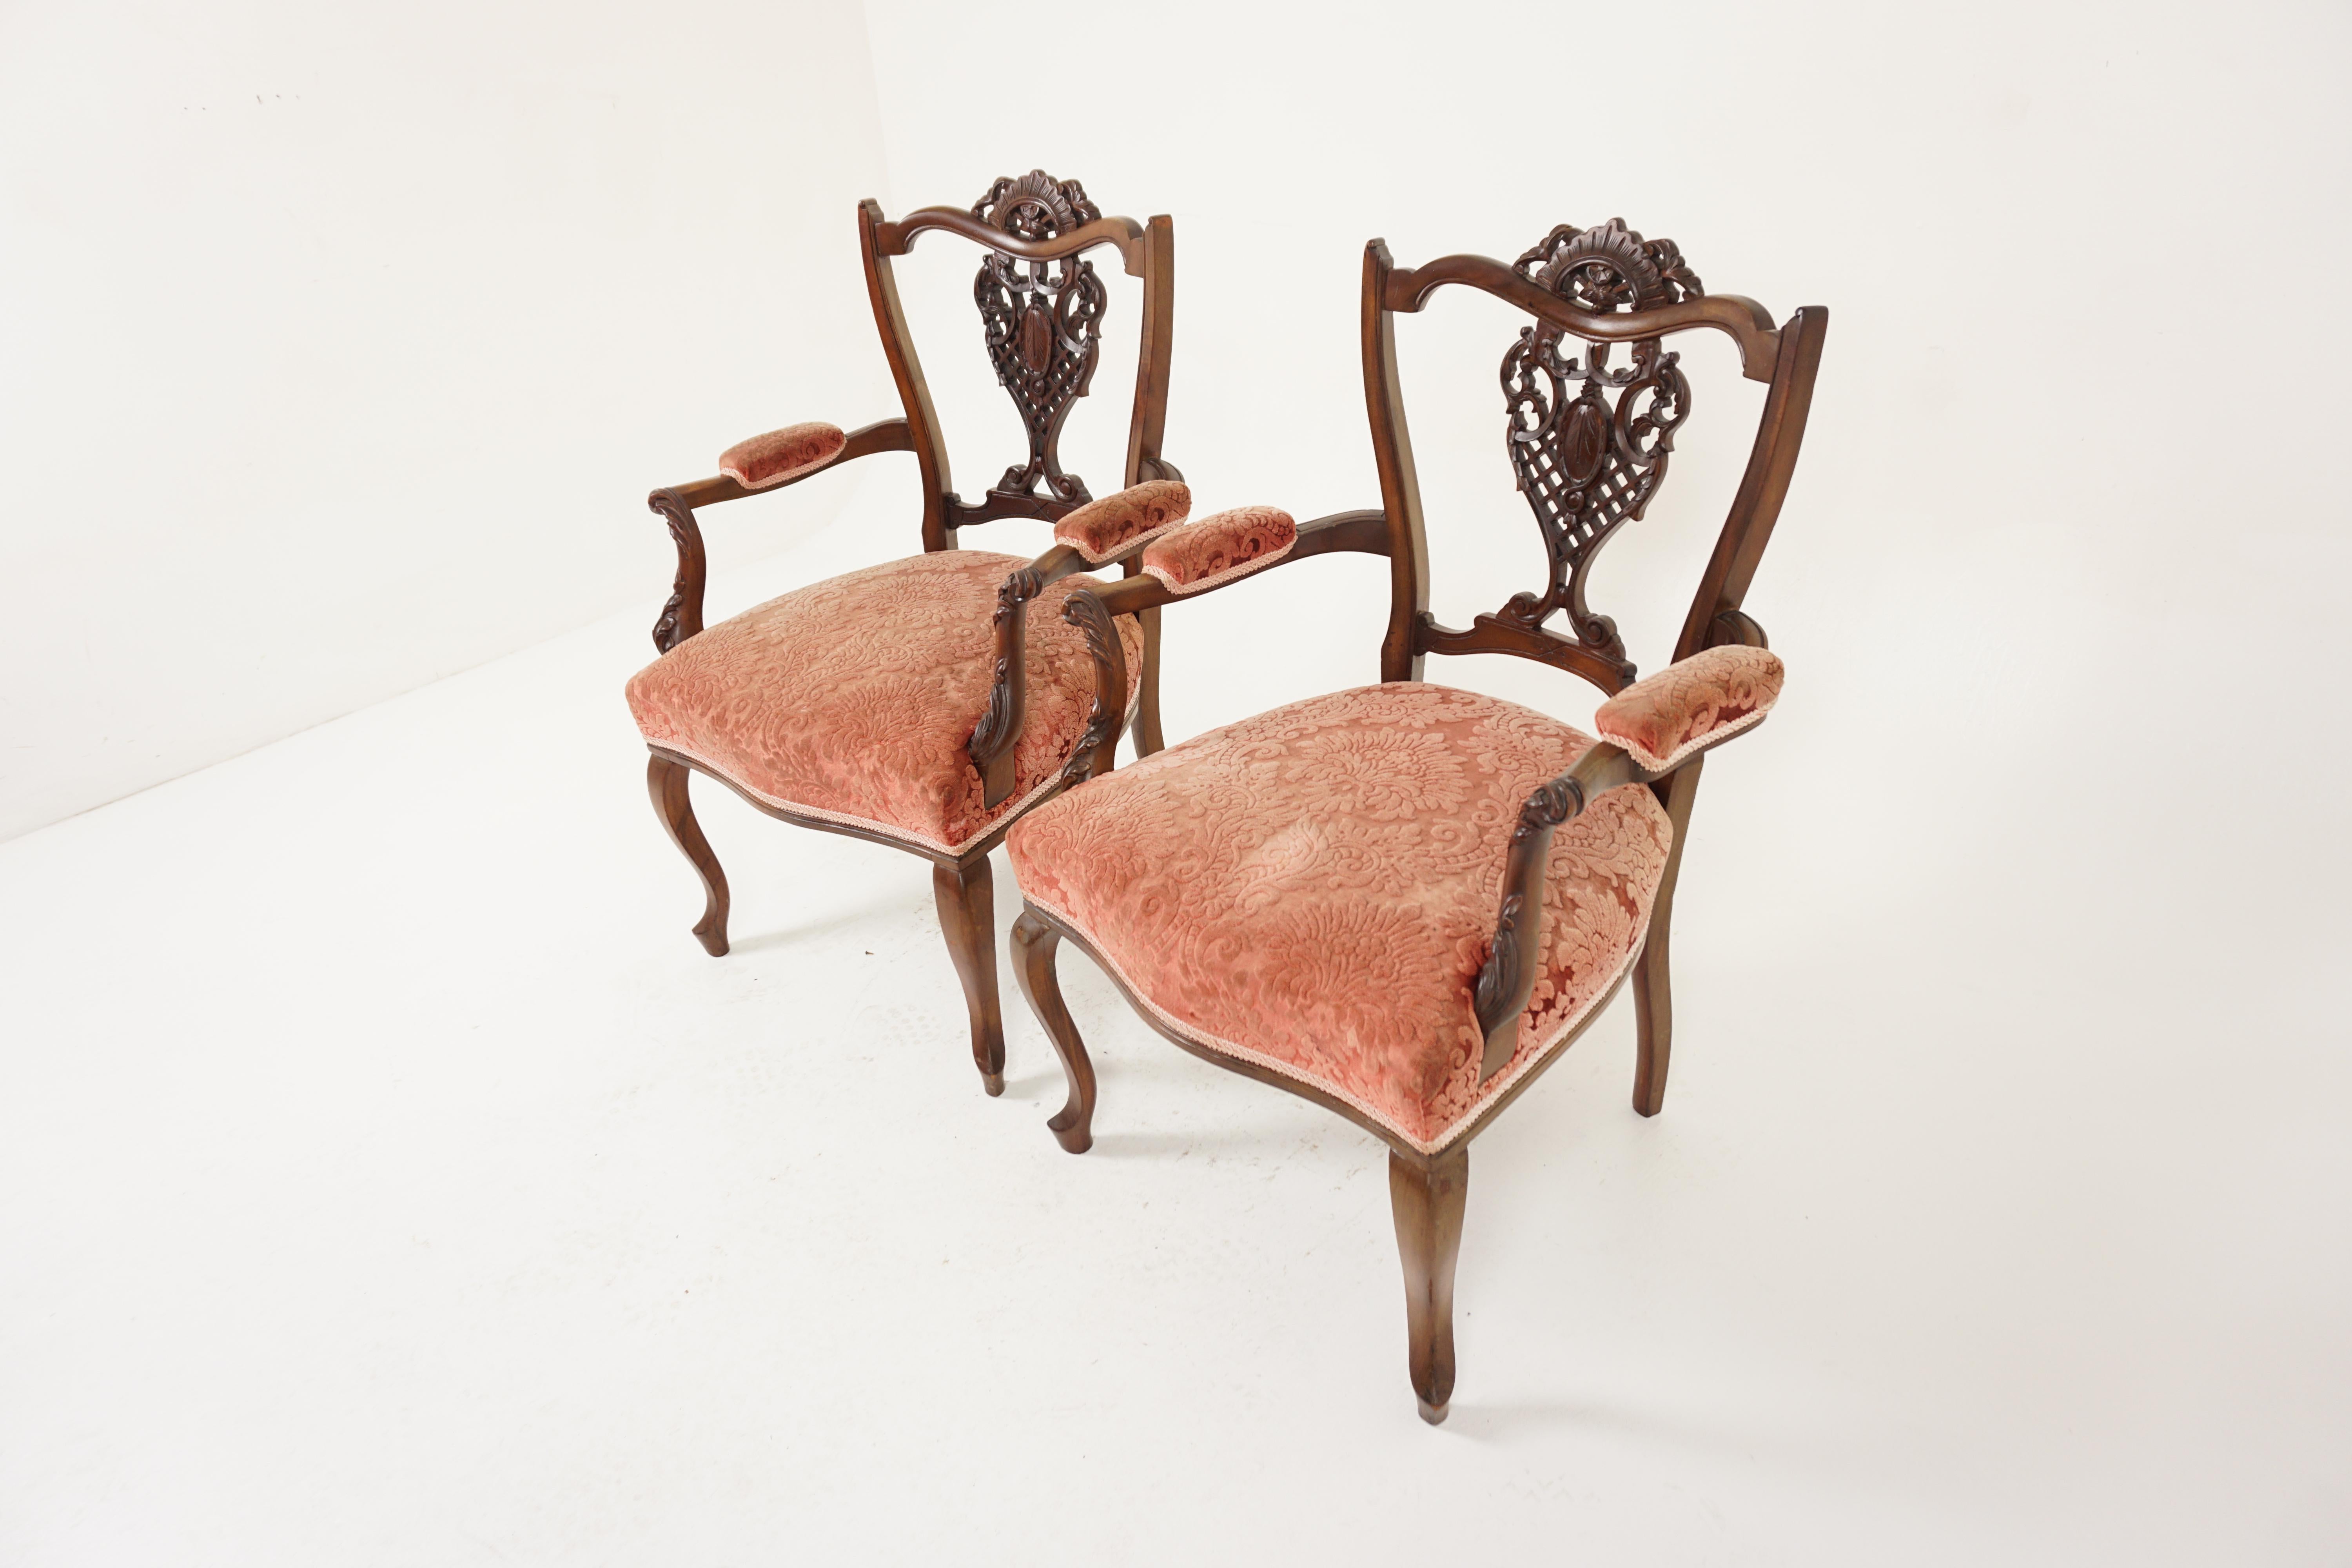 Antique Walnut Chairs, Pair of Edwardian Carved Walnut Arm Chairs, Parlor Chairs, Antique Furniture, Scotland 1900, H983

+ Scotland 1900 
+ Solid walnut 
+ Original finish 
+ Shaped carved top rail with foliage carving on crest and shaped